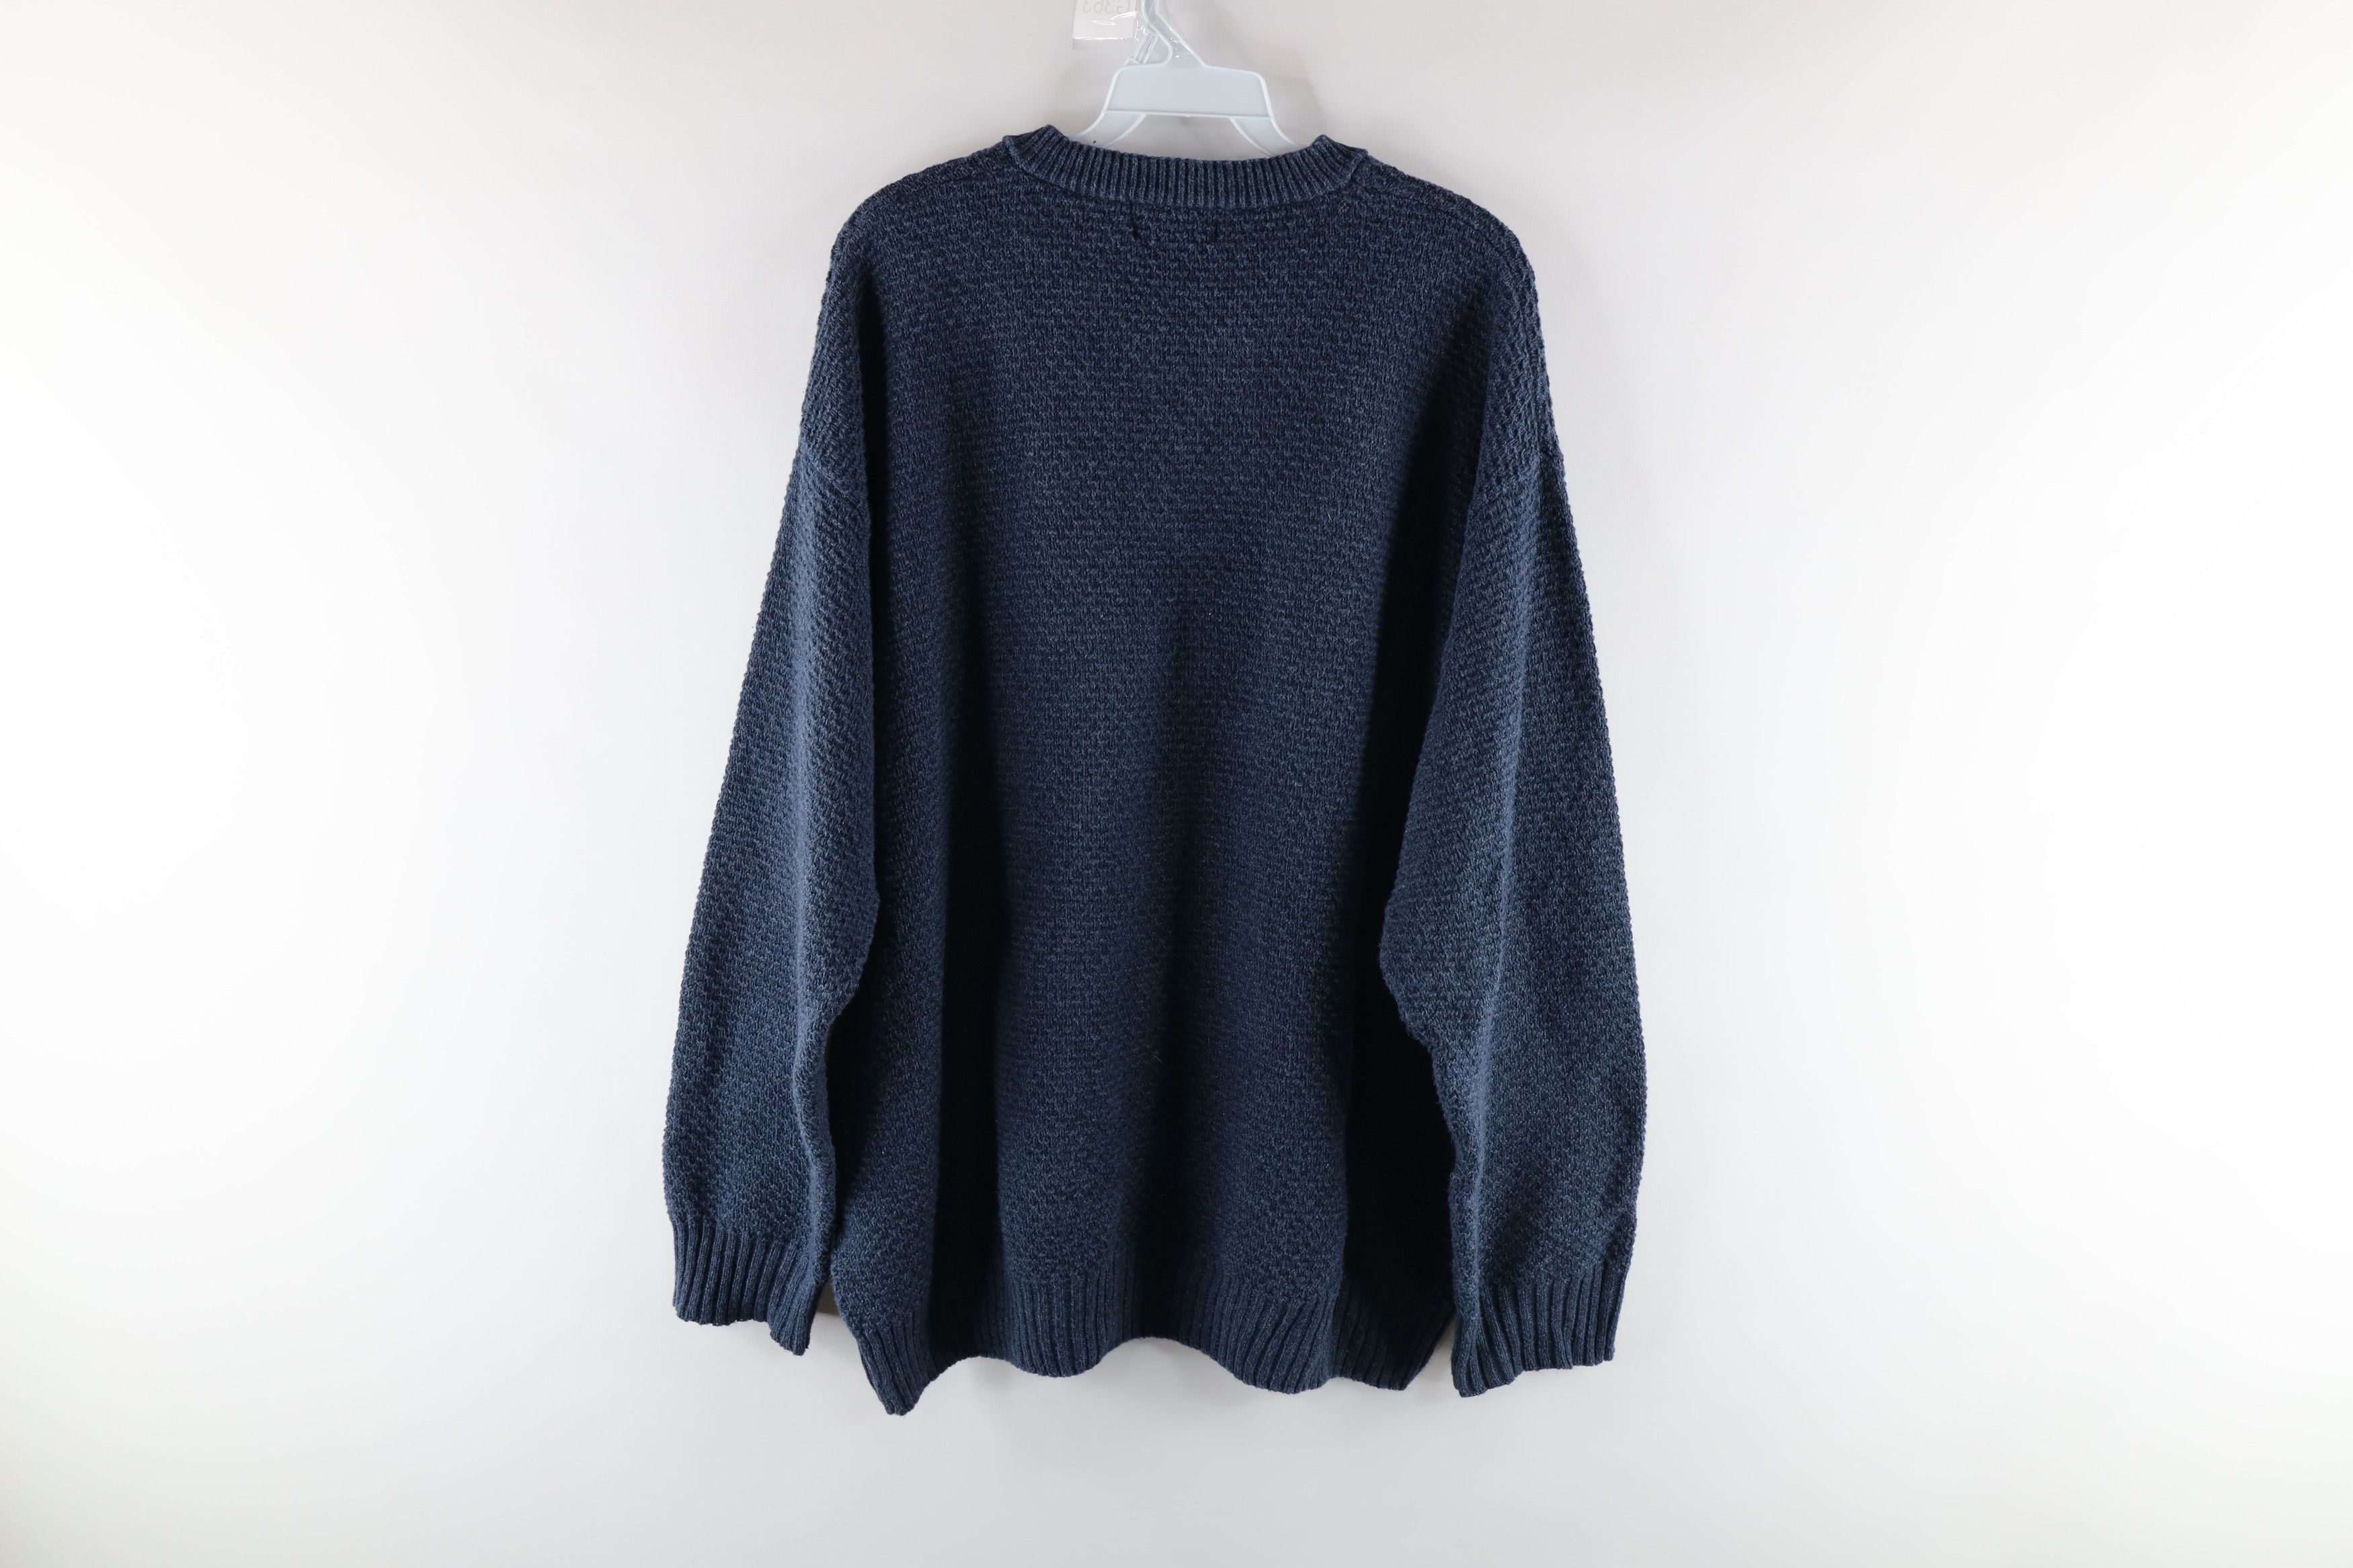 Vintage Vintage 90s Woolrich Blank Knit Pullover Henley Sweater Size US XL / EU 56 / 4 - 6 Thumbnail